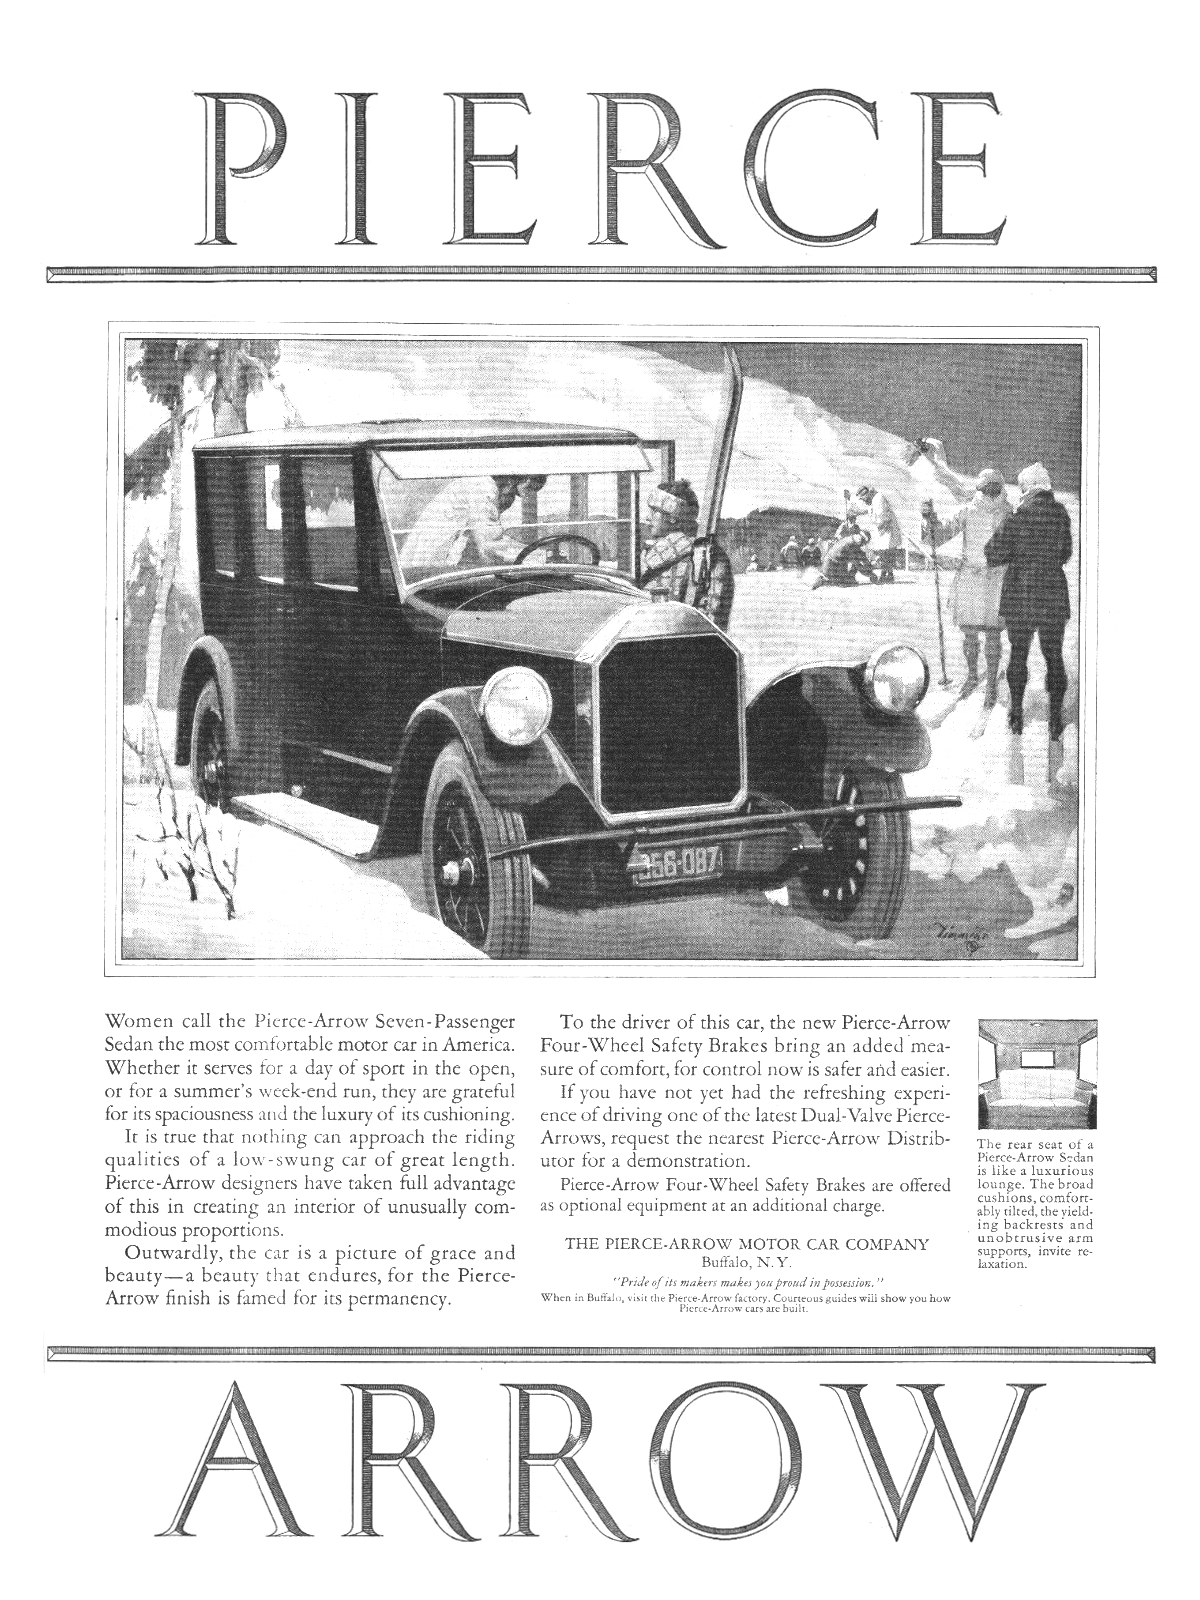 Pierce-Arrow Ad (1924) – Illustrated by Harry Laverne Timmins